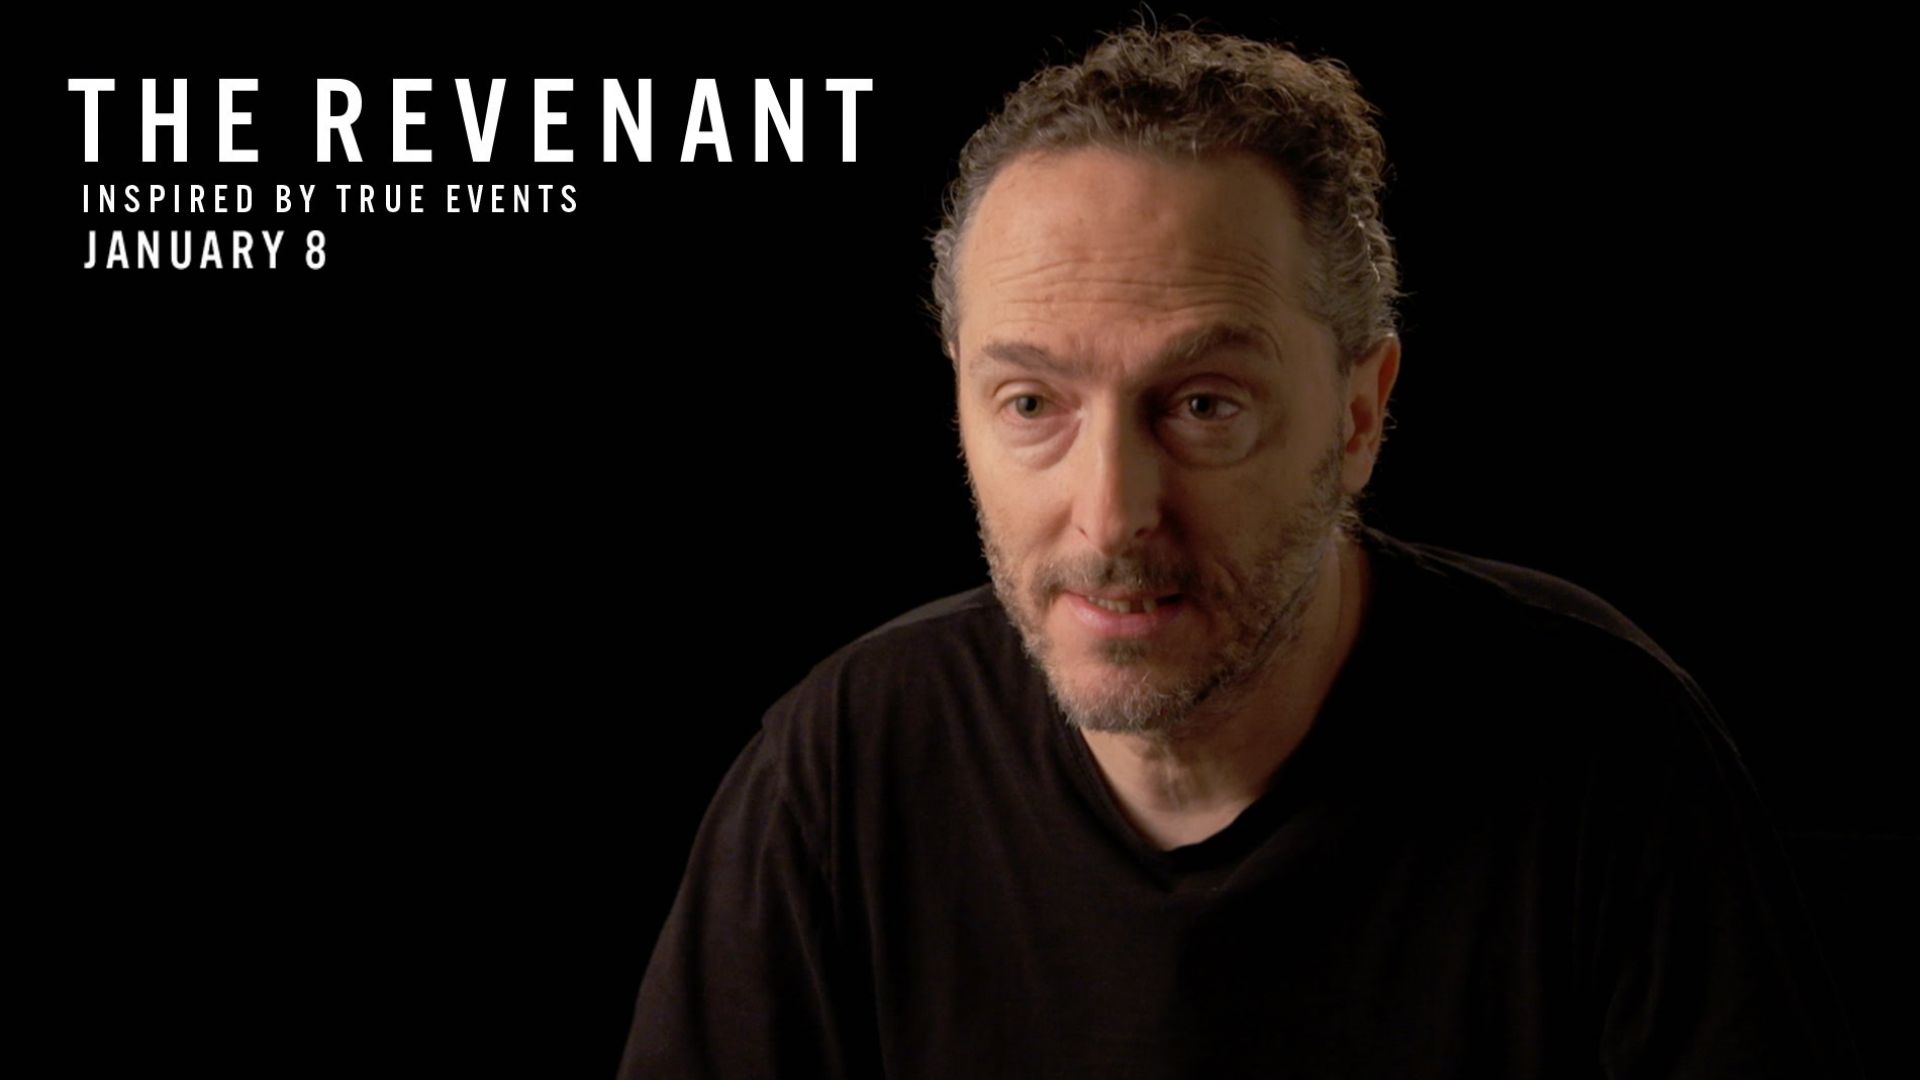 The star of the show - The Revenant featurette focuses on Di